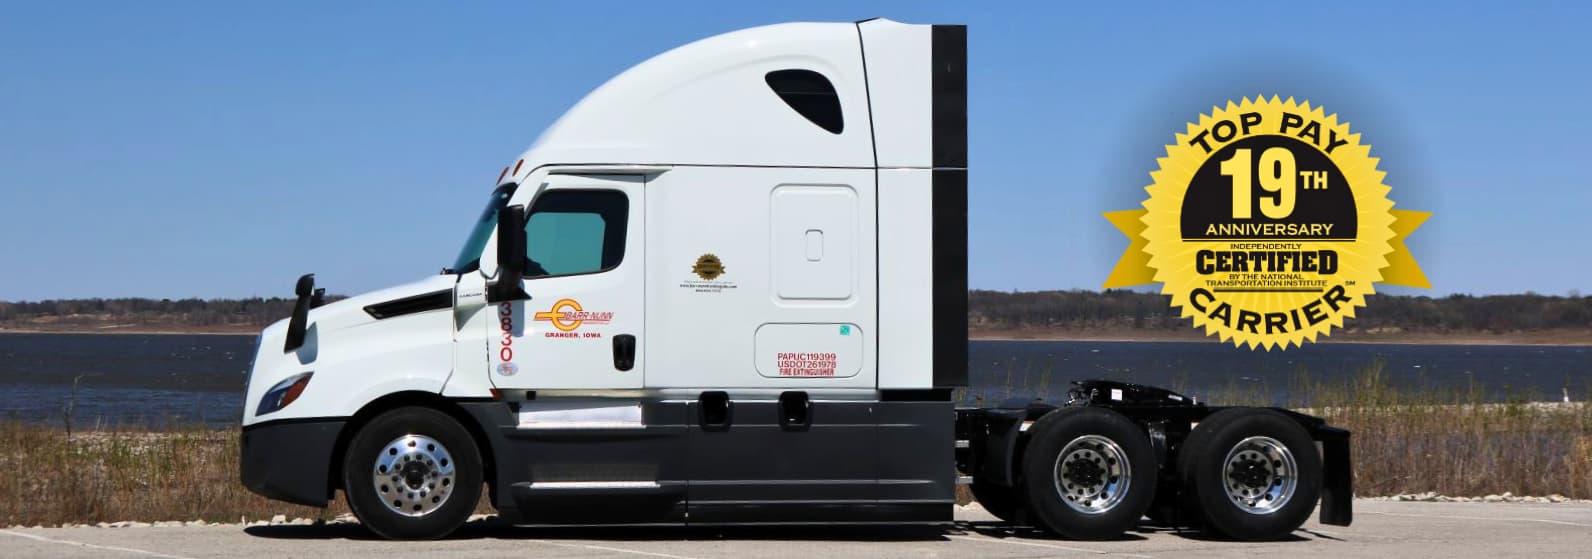 Barr-Nunn offers many types of pay options for solo professional truck drivers